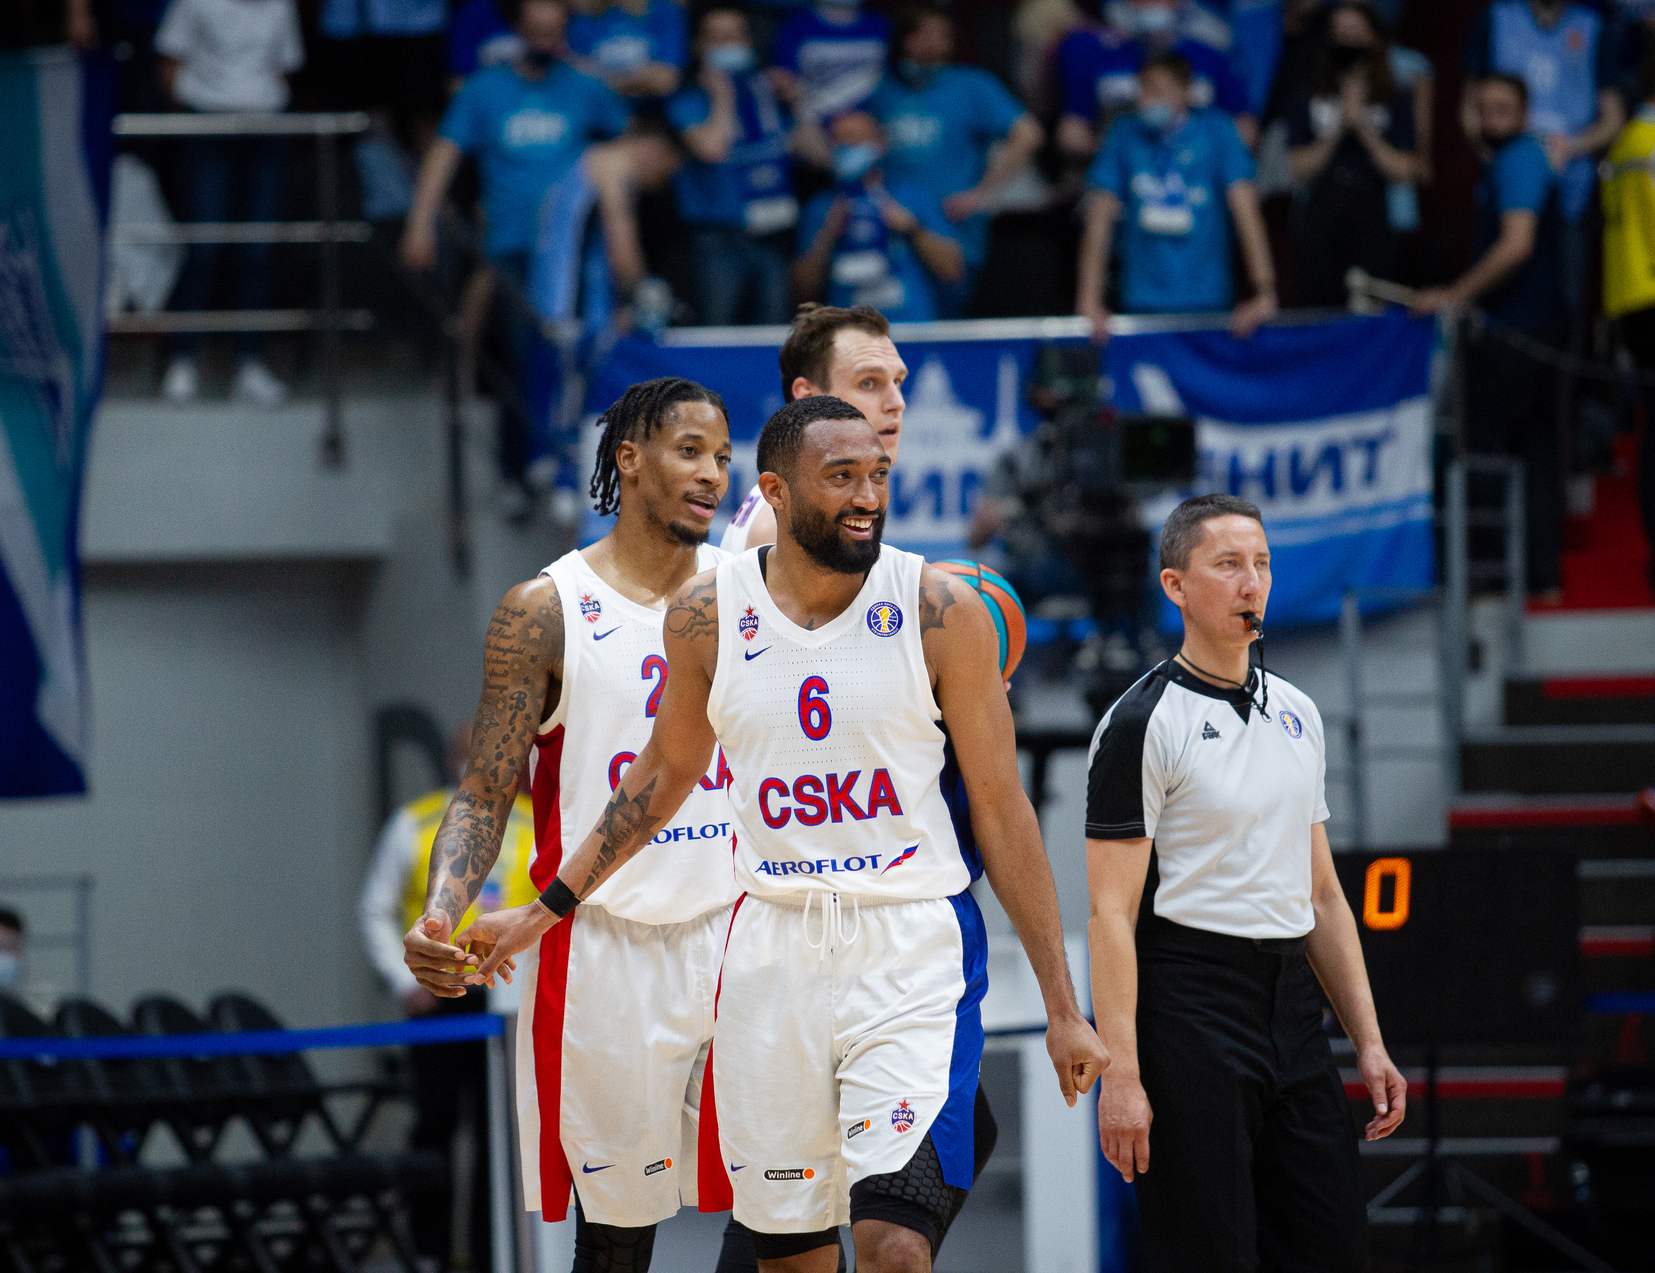 UNICS return to the Finals after a 5-year absence, CSKA surpass the best team in the regular season in a tough series. Semifinals in review